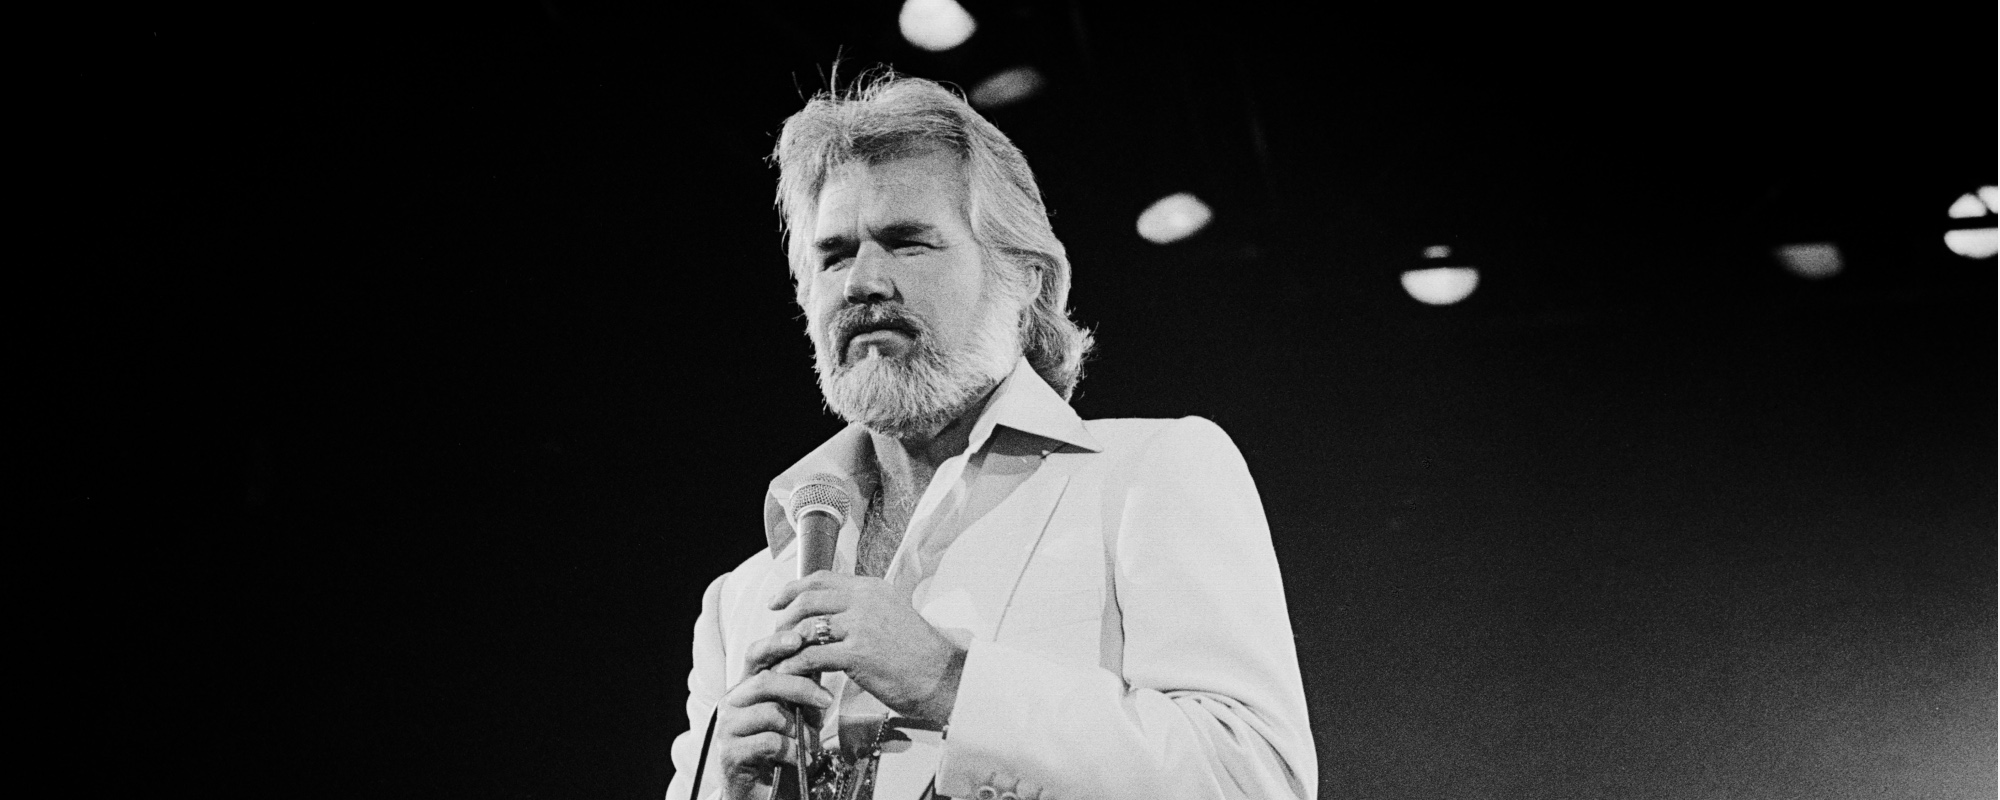 Who Wrote Kenny Rogers’ No. 1 Hit “Lady”?